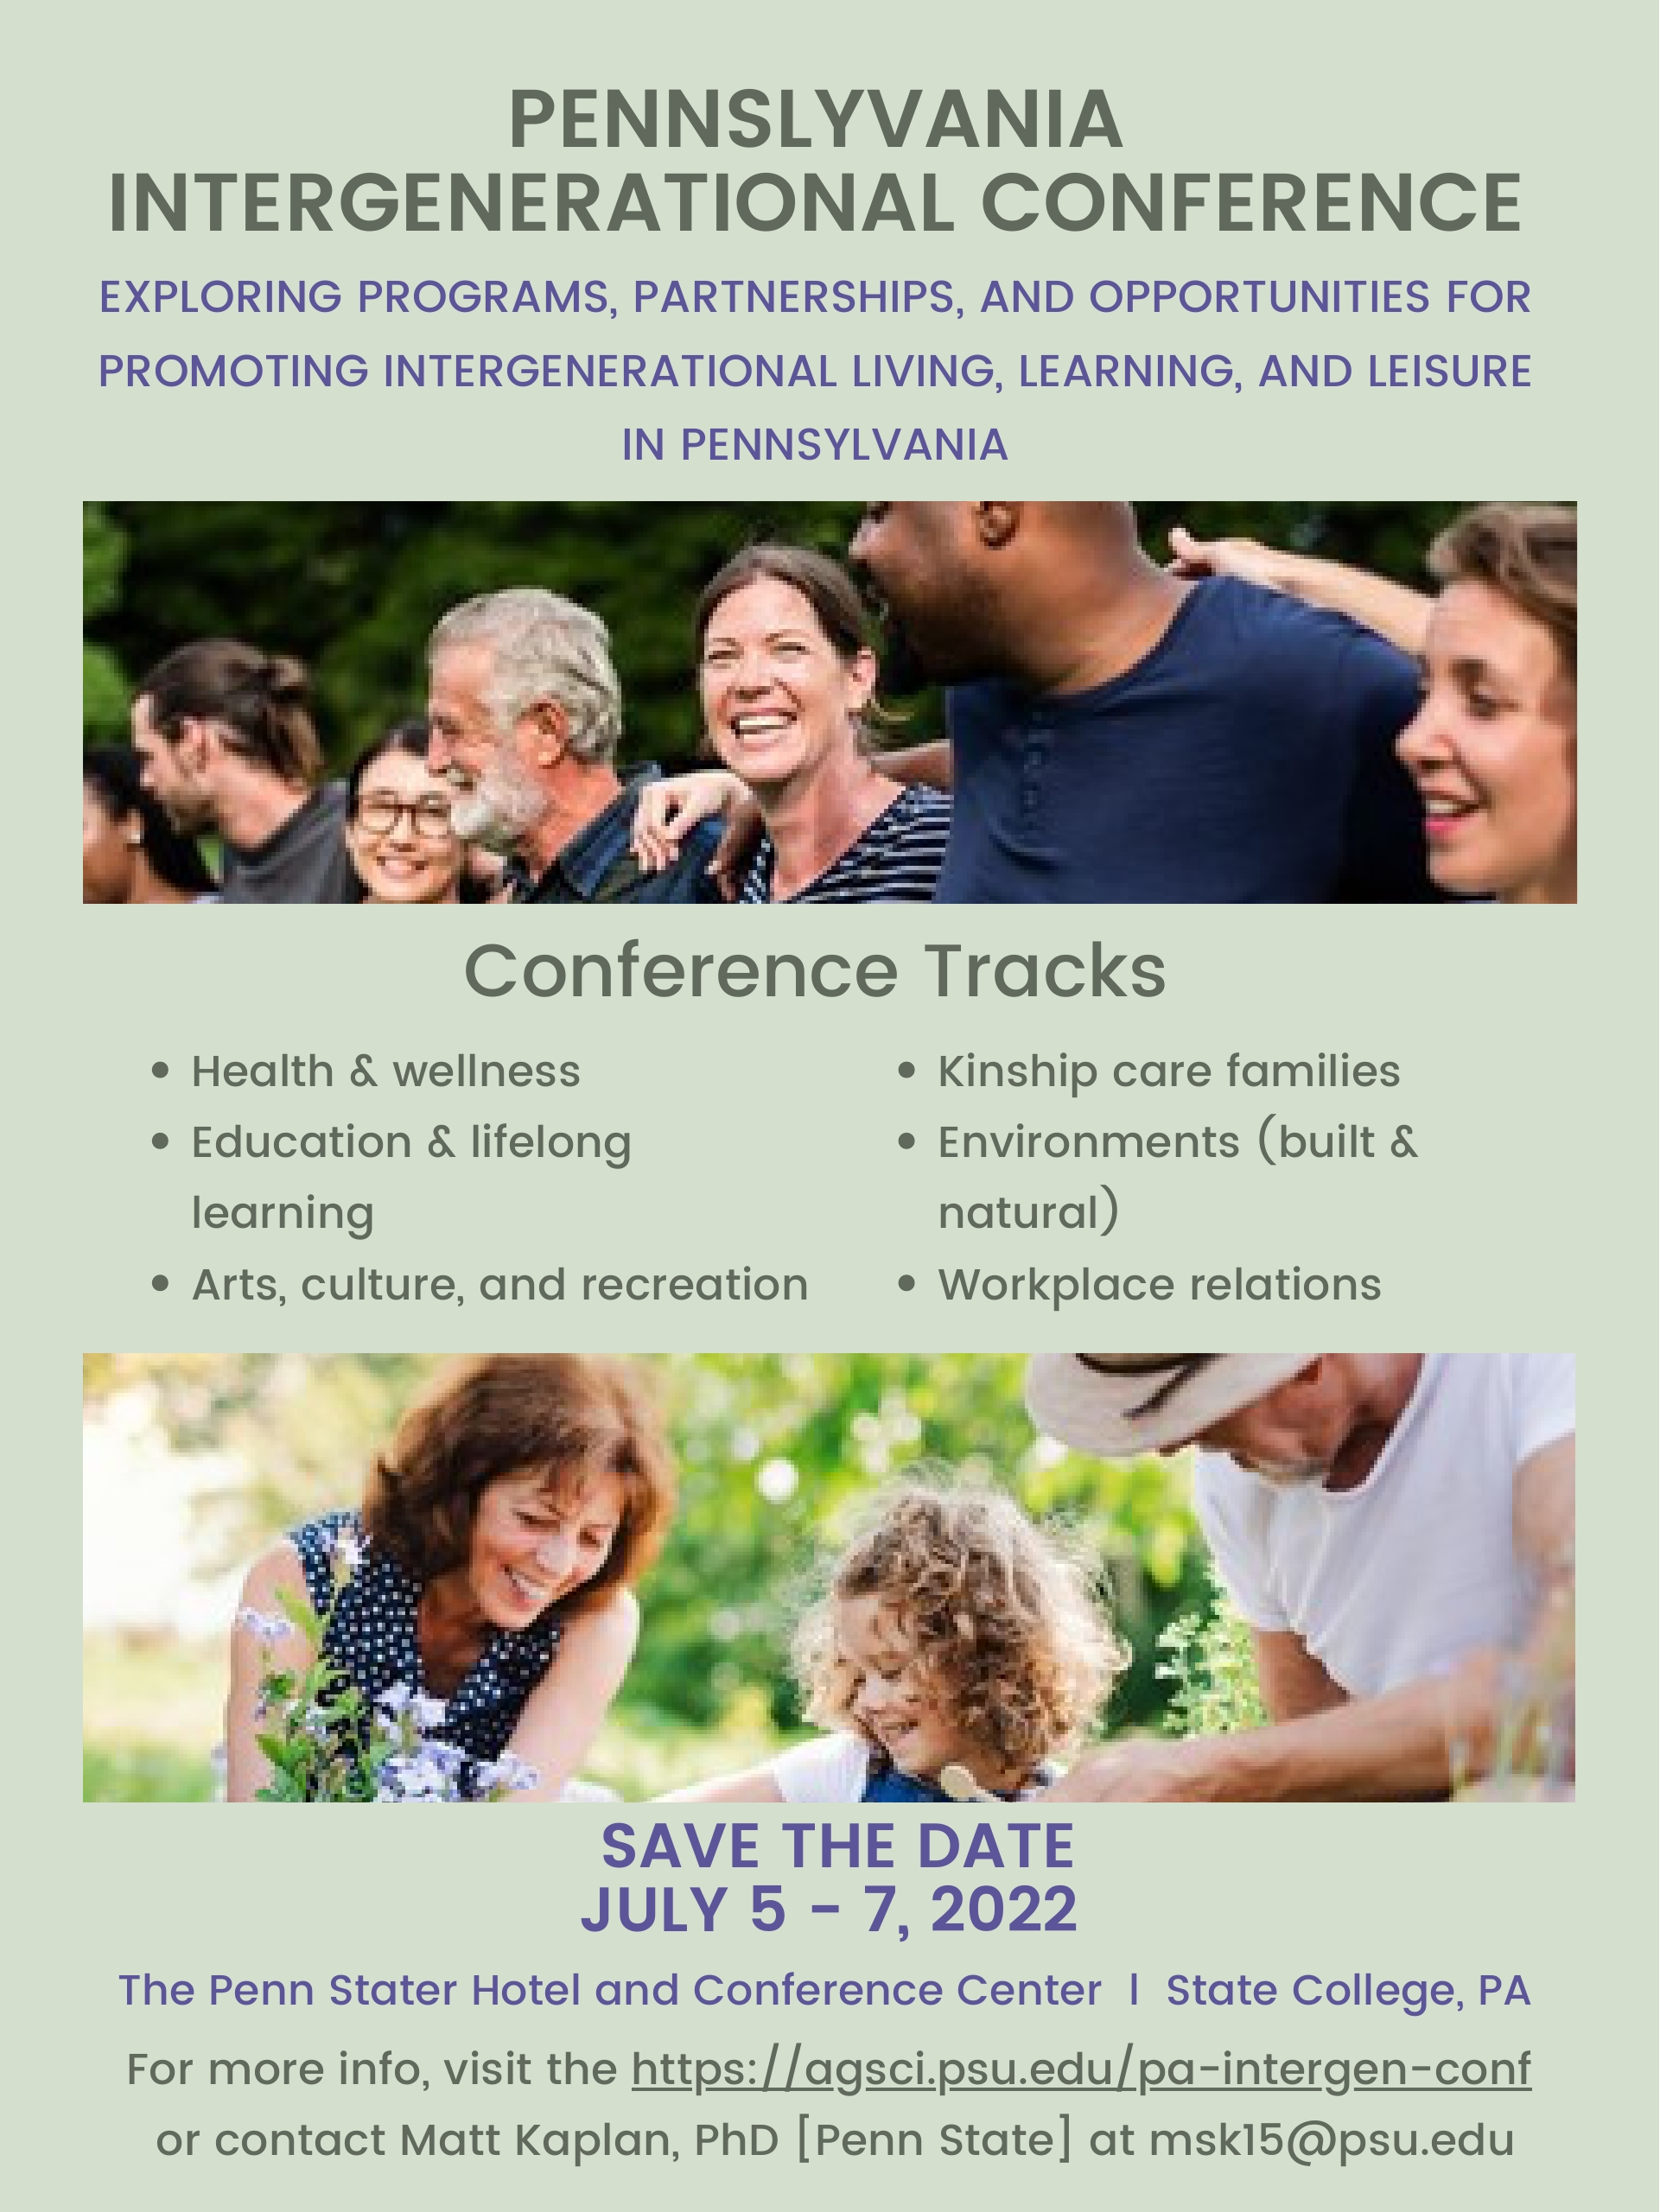 PENNSLYVANIA INTERGENERATIONAL CONFERENCE  SAVE THE DATE JULY 5 - 7, 2022